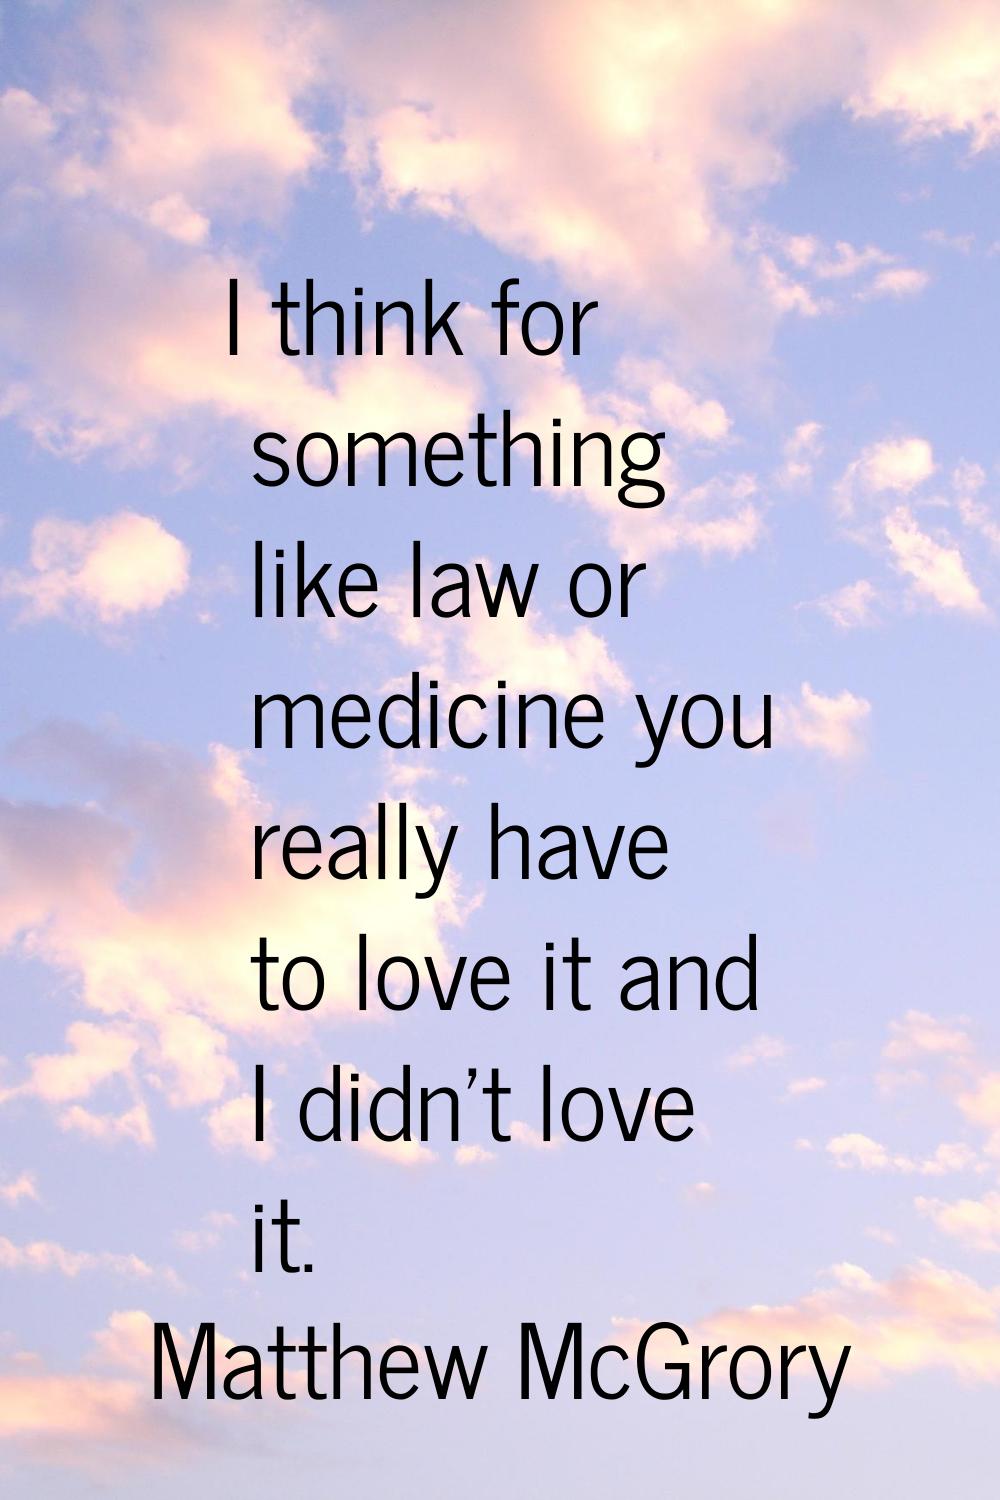 I think for something like law or medicine you really have to love it and I didn't love it.